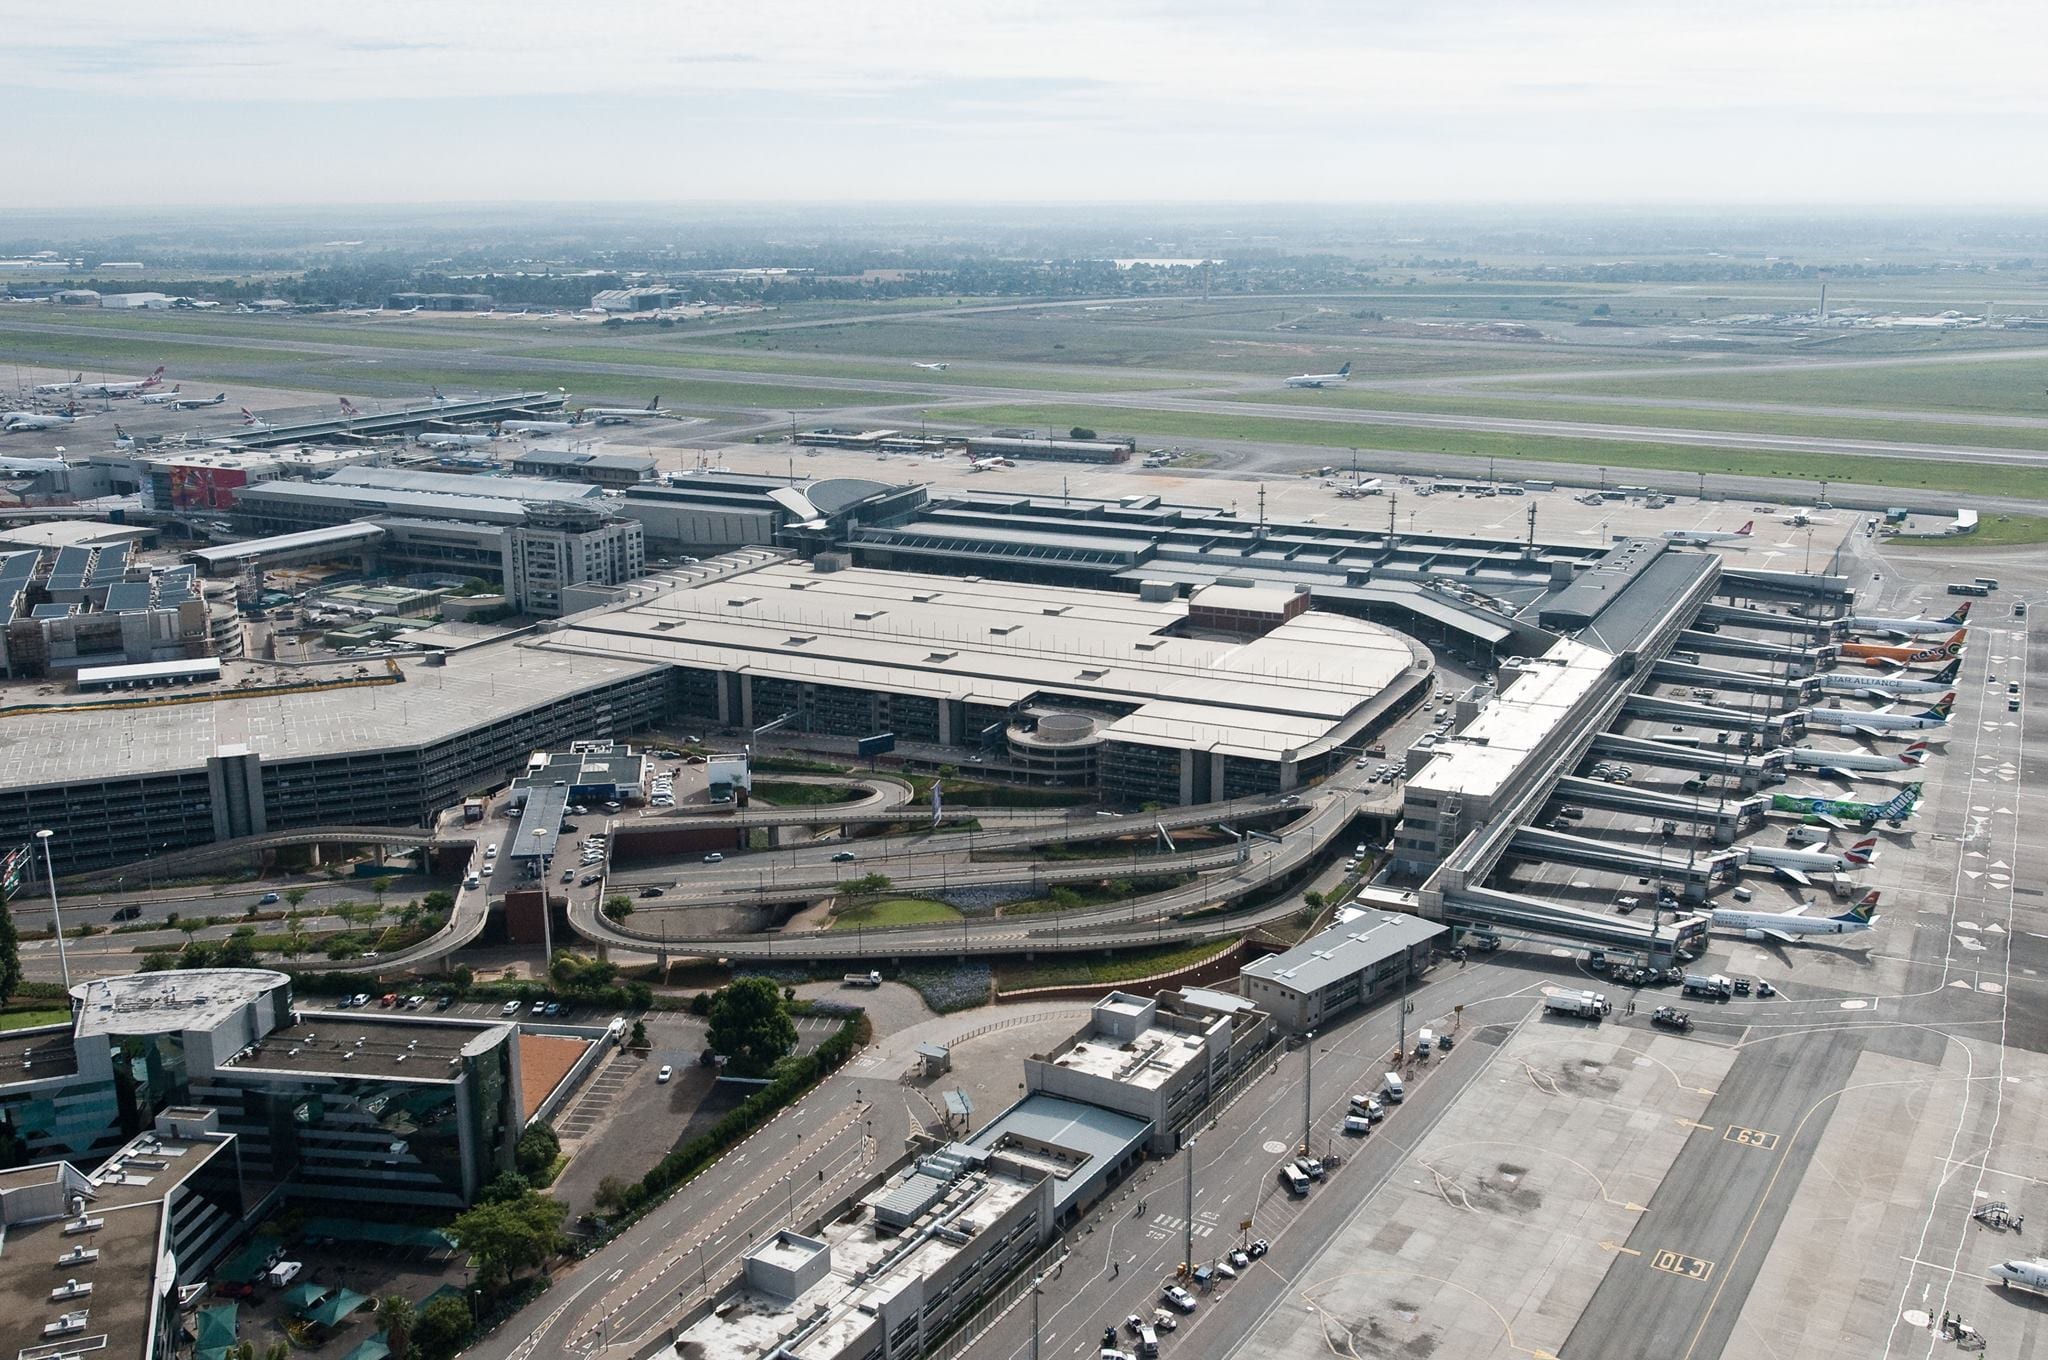 this is the busiest airport in africa